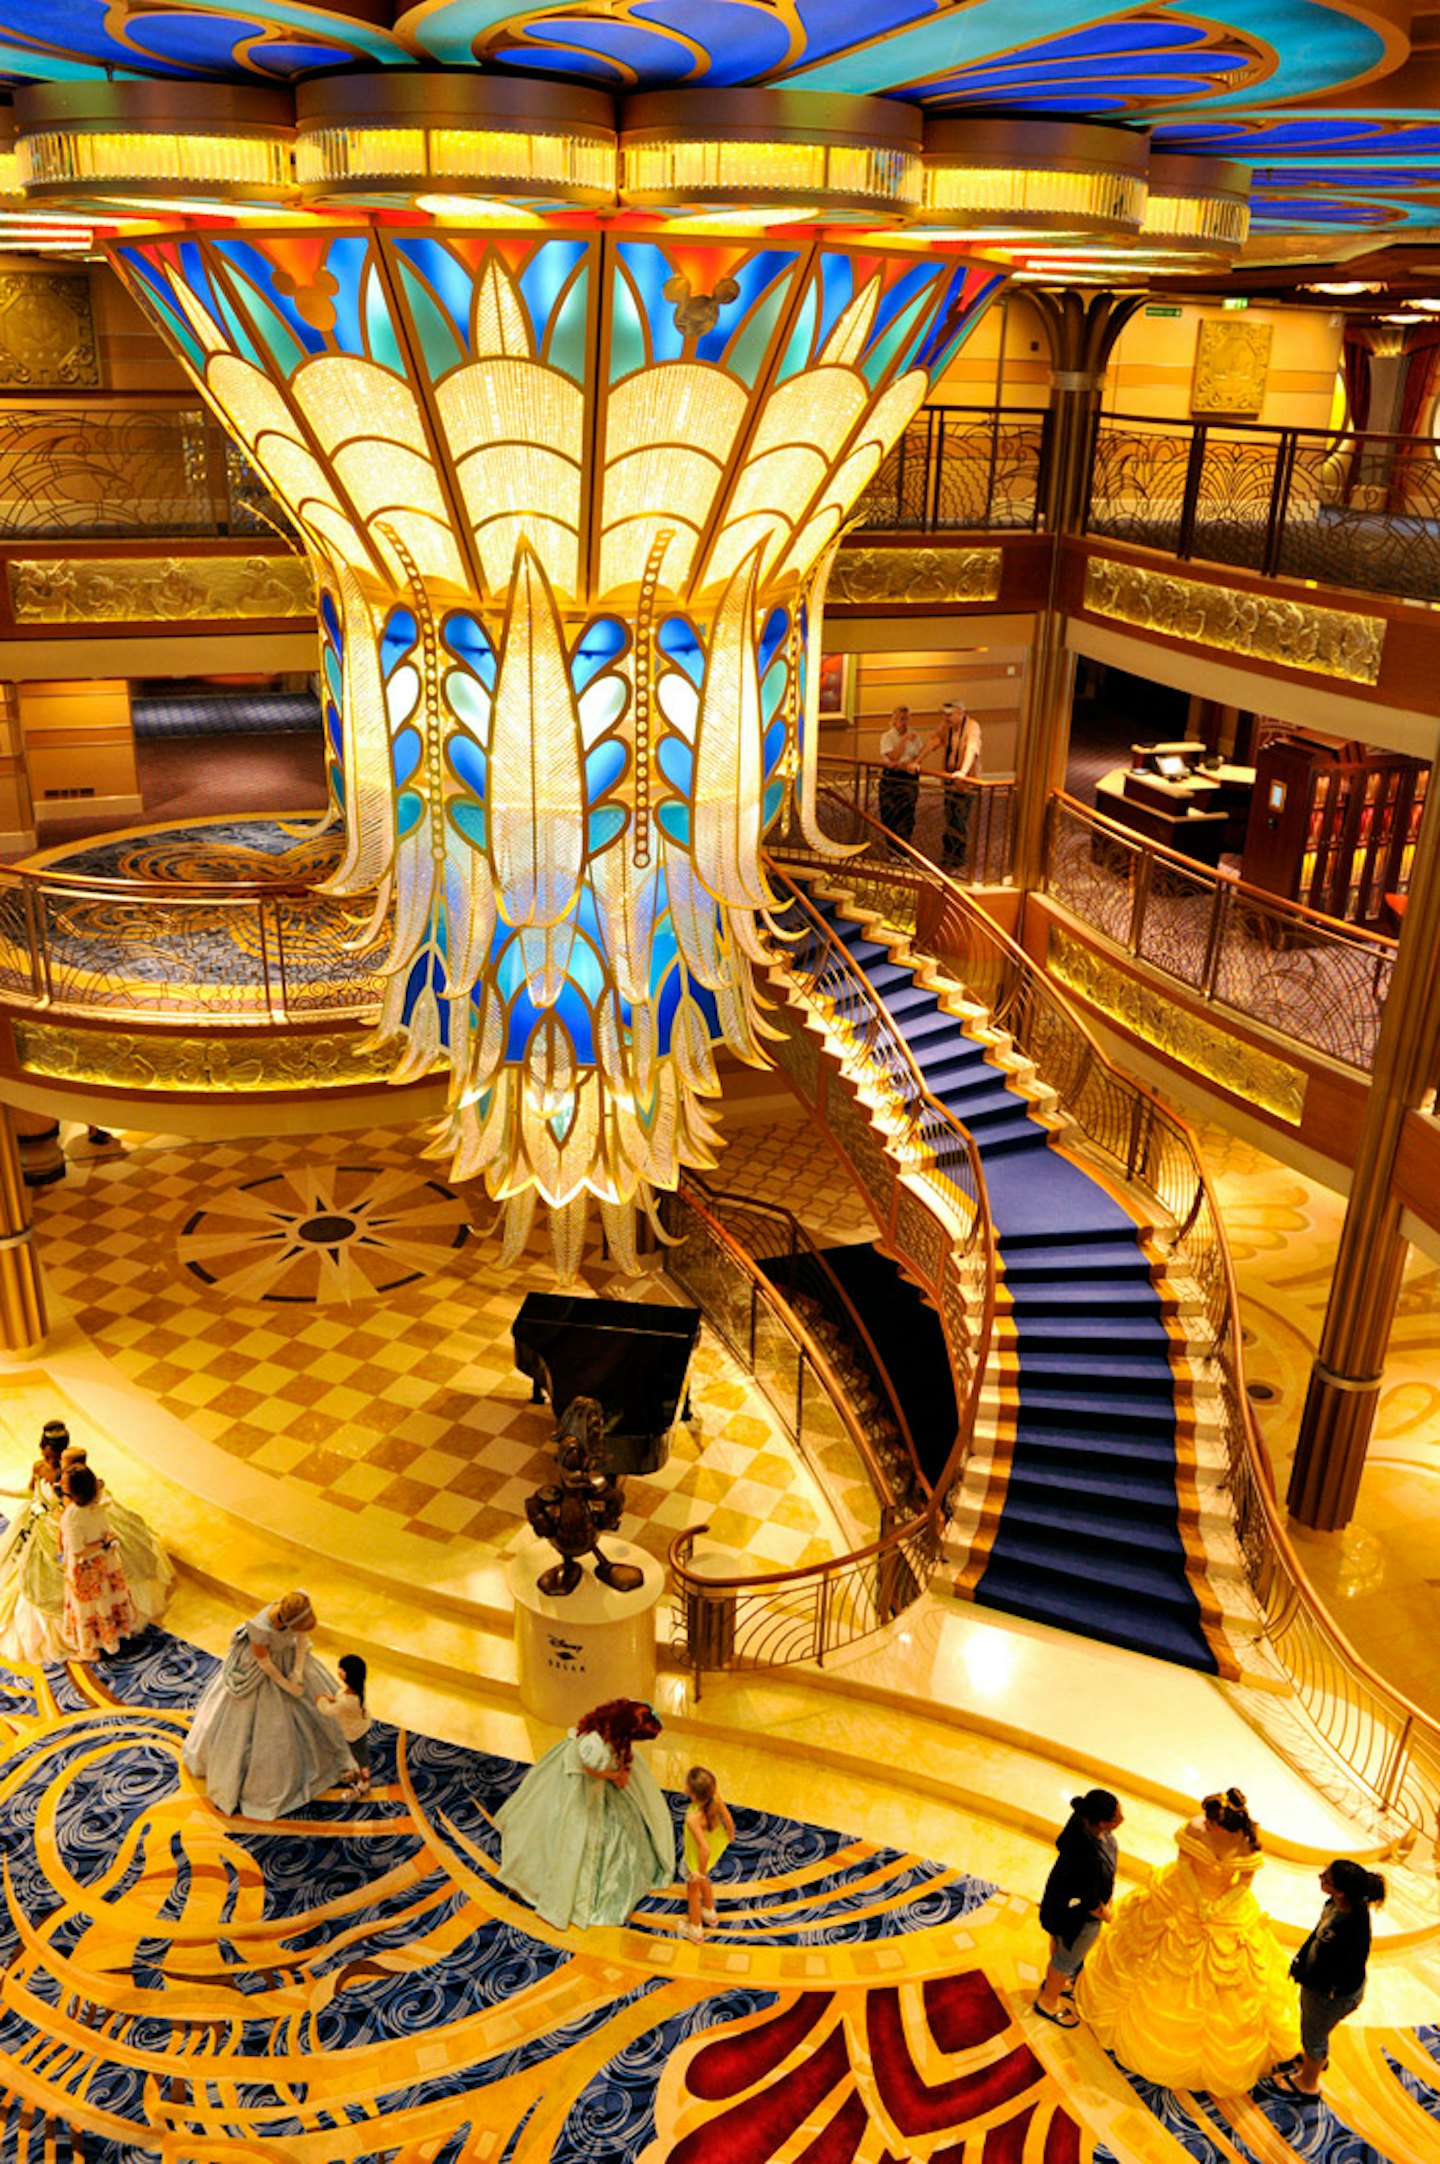 Disney Dream Disney\'s Newest Ship, With Meeting Space and Loads of